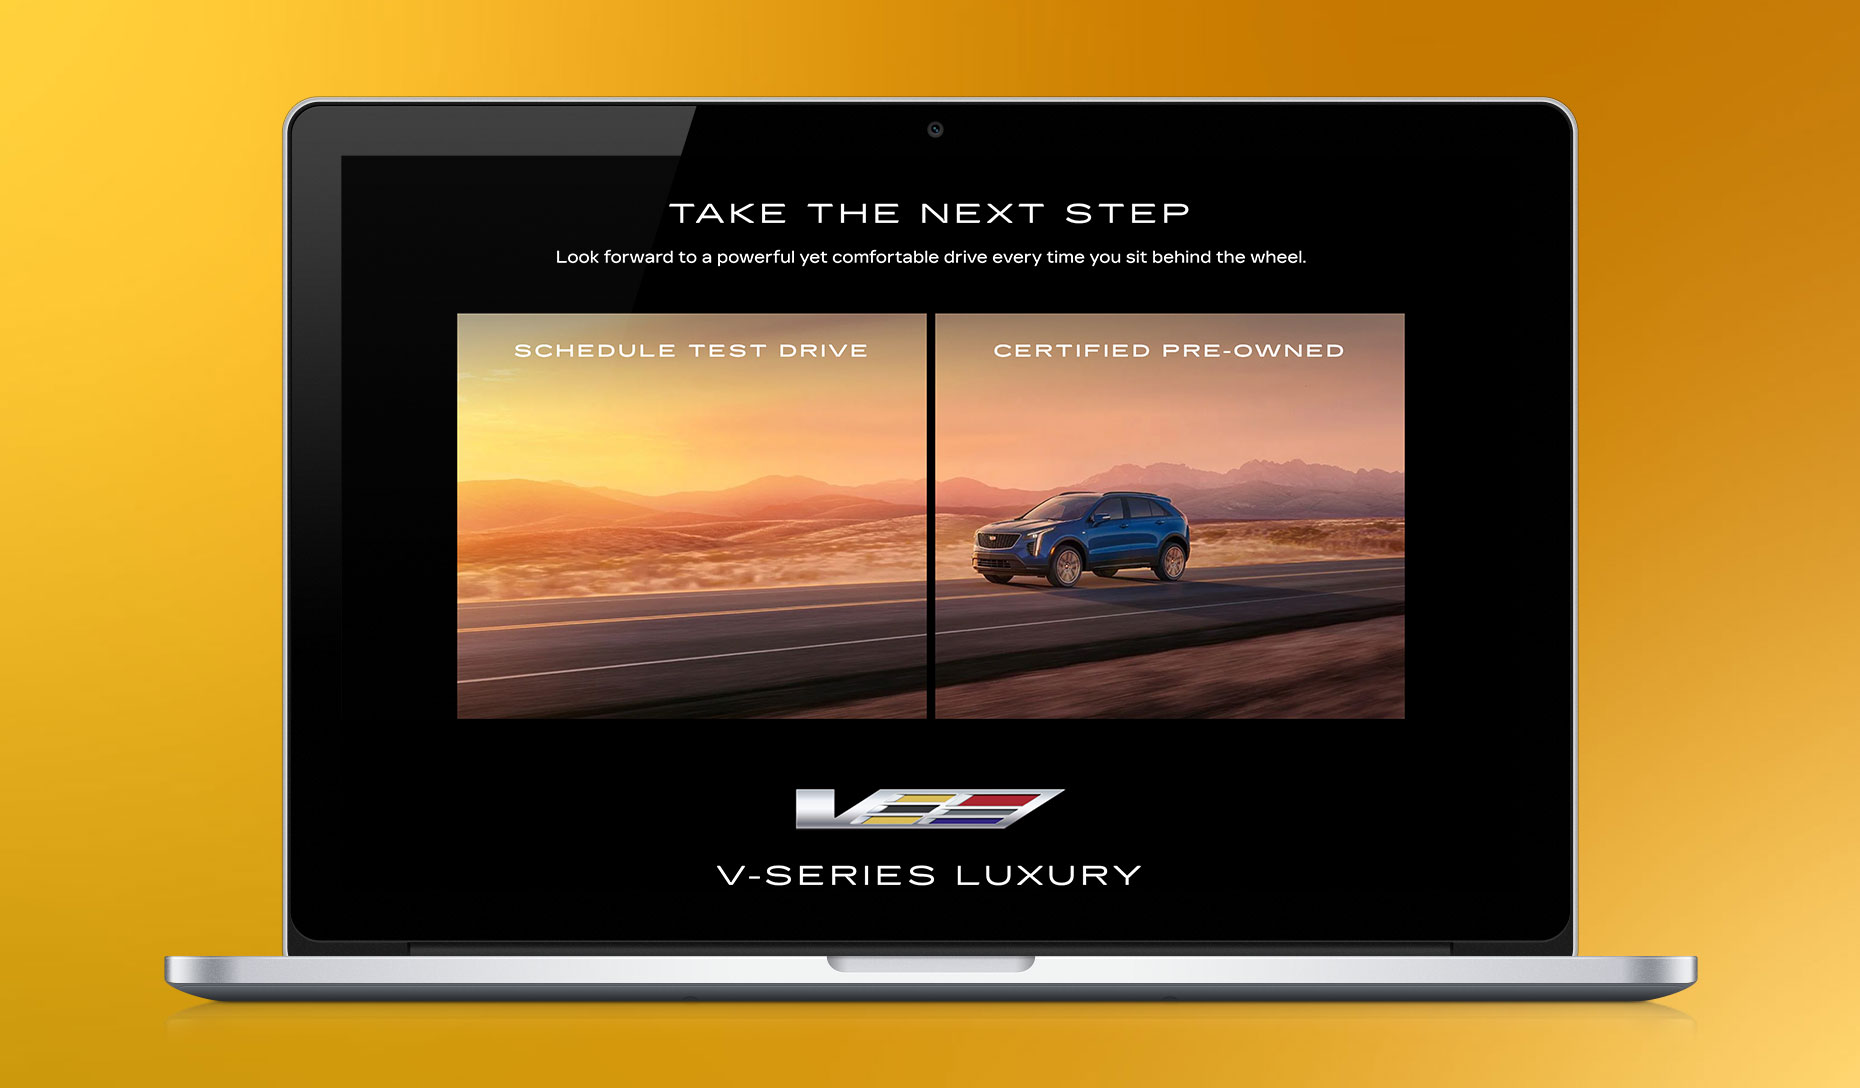 Cadillac Rebranded Homepage Feature on a laptop screen